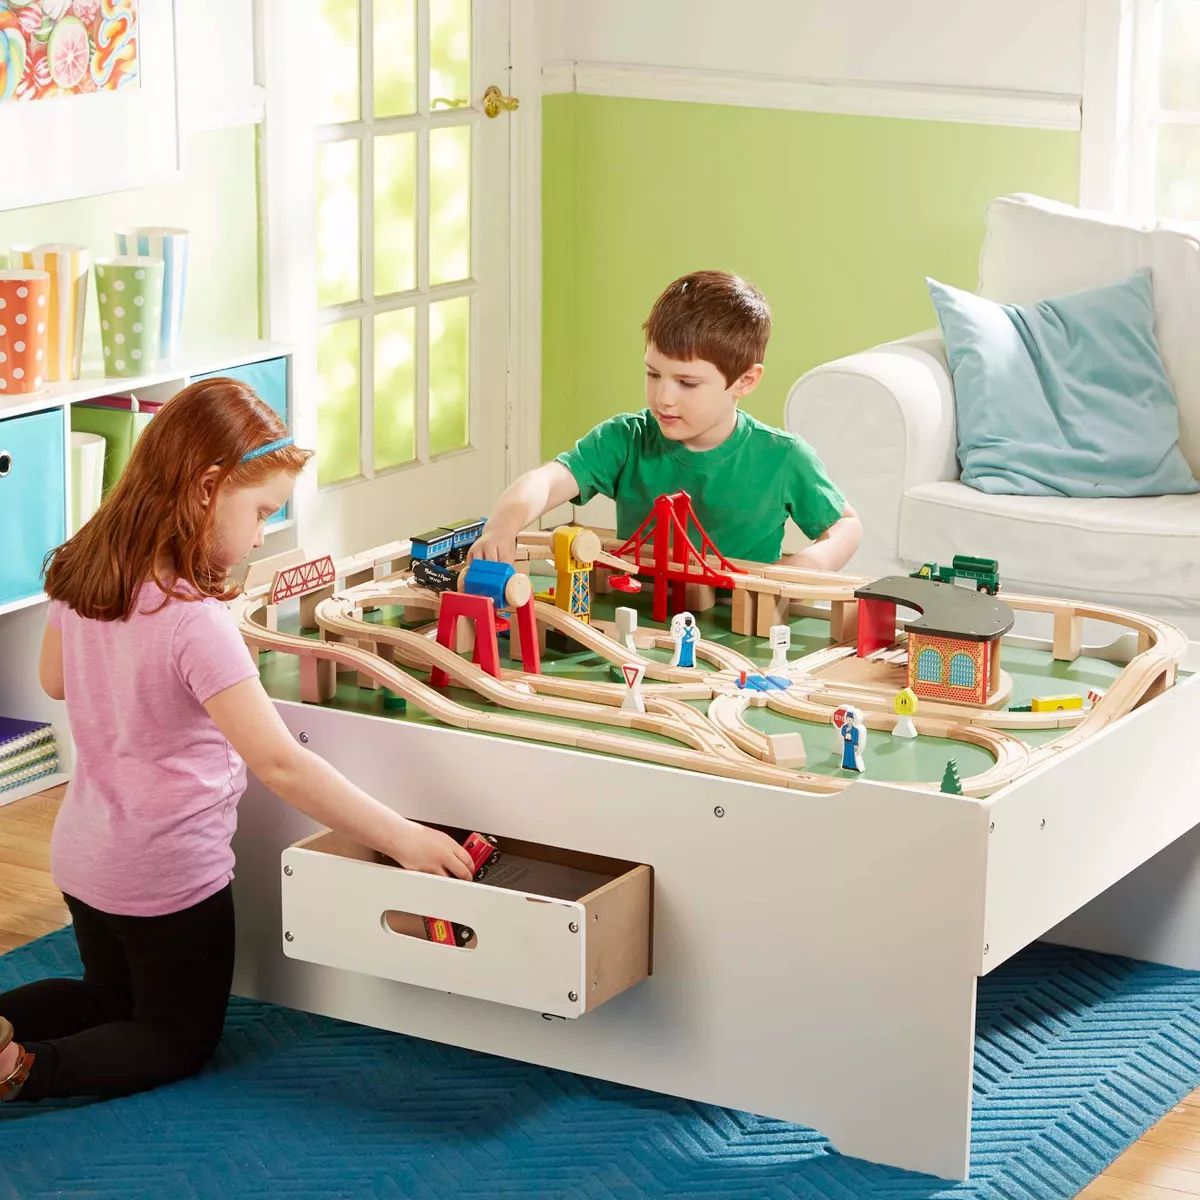 Melissa & Doug Deluxe Wooden Multi-Activity Play Table - For Trains, Puzzles, Games, More | Target